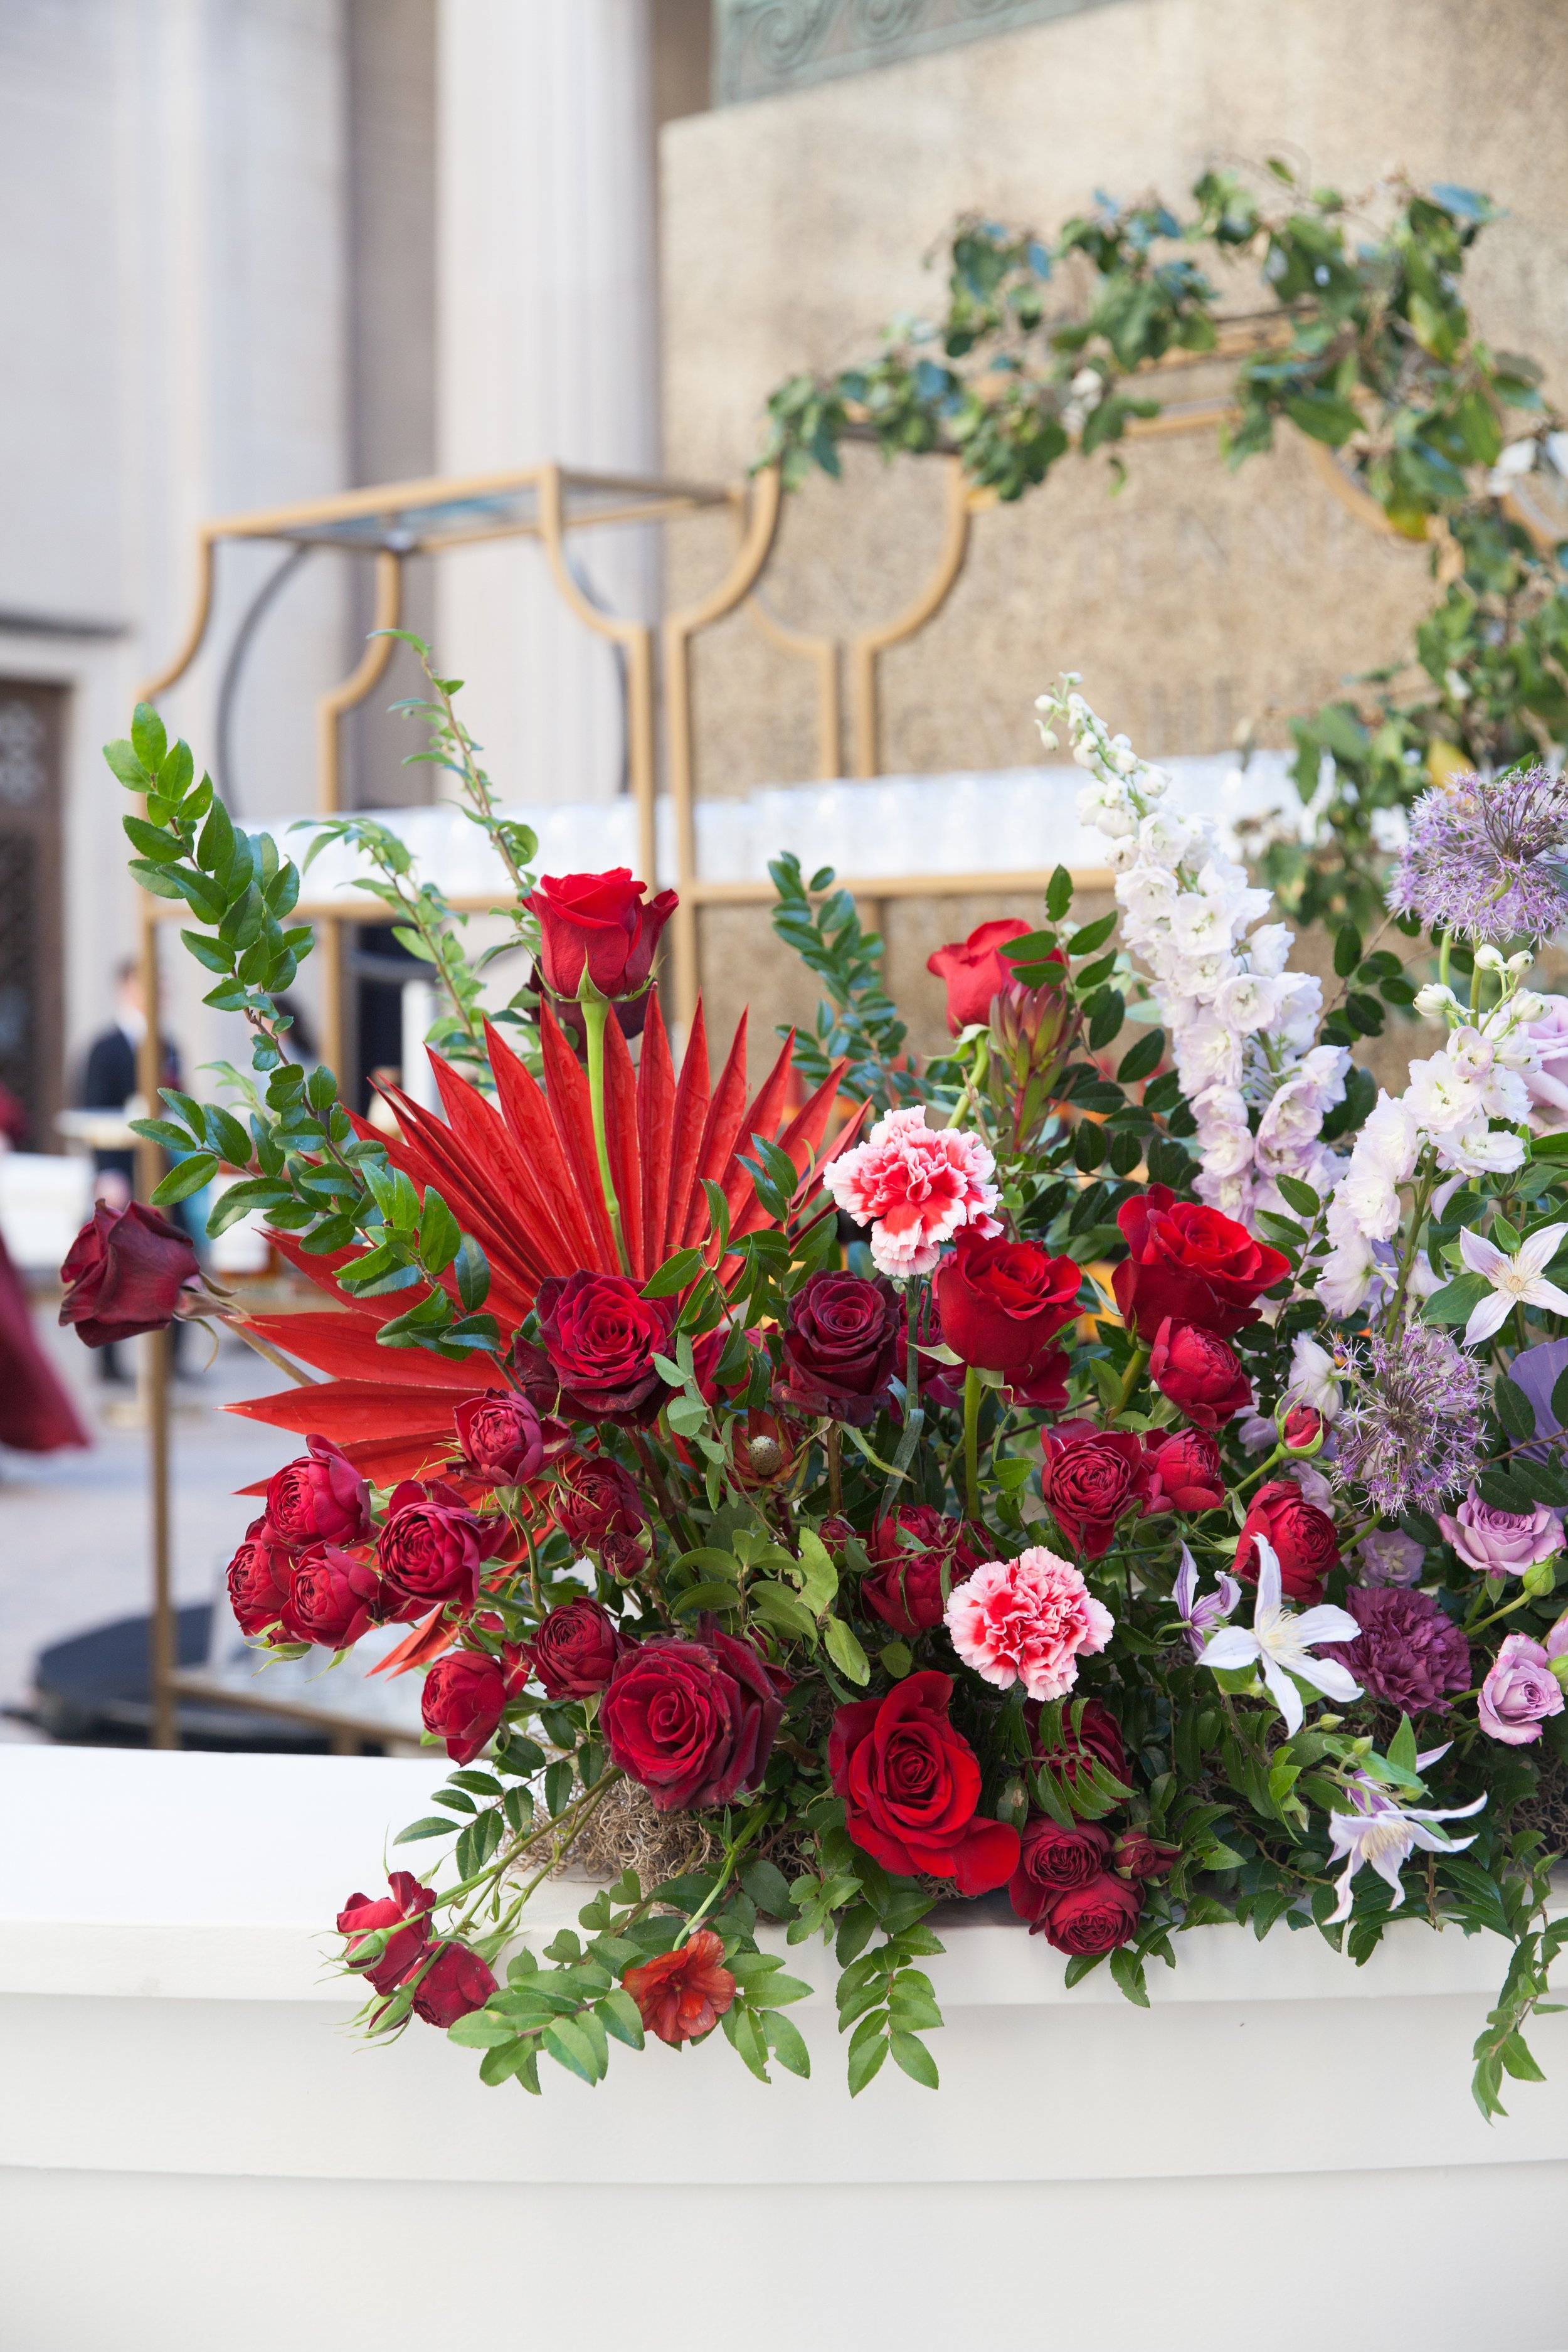 Bright and colorful arrangements create an inviting scene for guests at the TPAC Gala in Nashville Tennessee. Florals composed of roses, hydrangeas, tulips, snapdragons, dried palm, and anthurium. Designed by Rosemary and Finch.